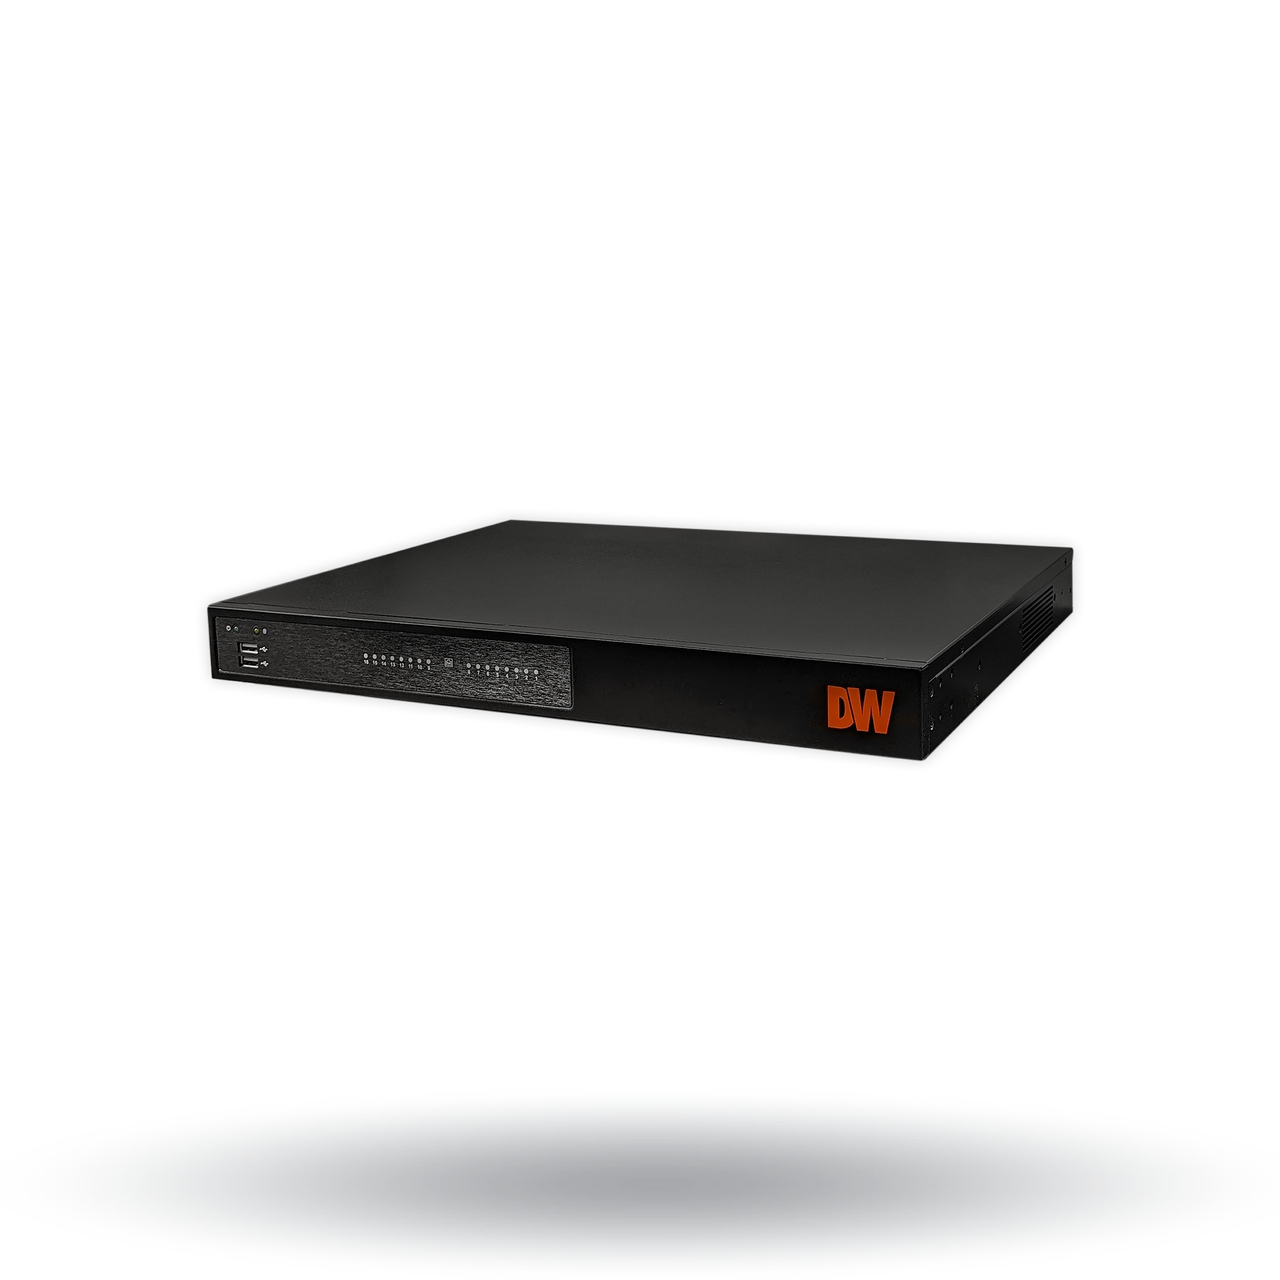 Digital Watchdog DW-BJCX32T-LX 24-Channel 80Mbps NVR with 16 PoE Ports, 32TB HDD